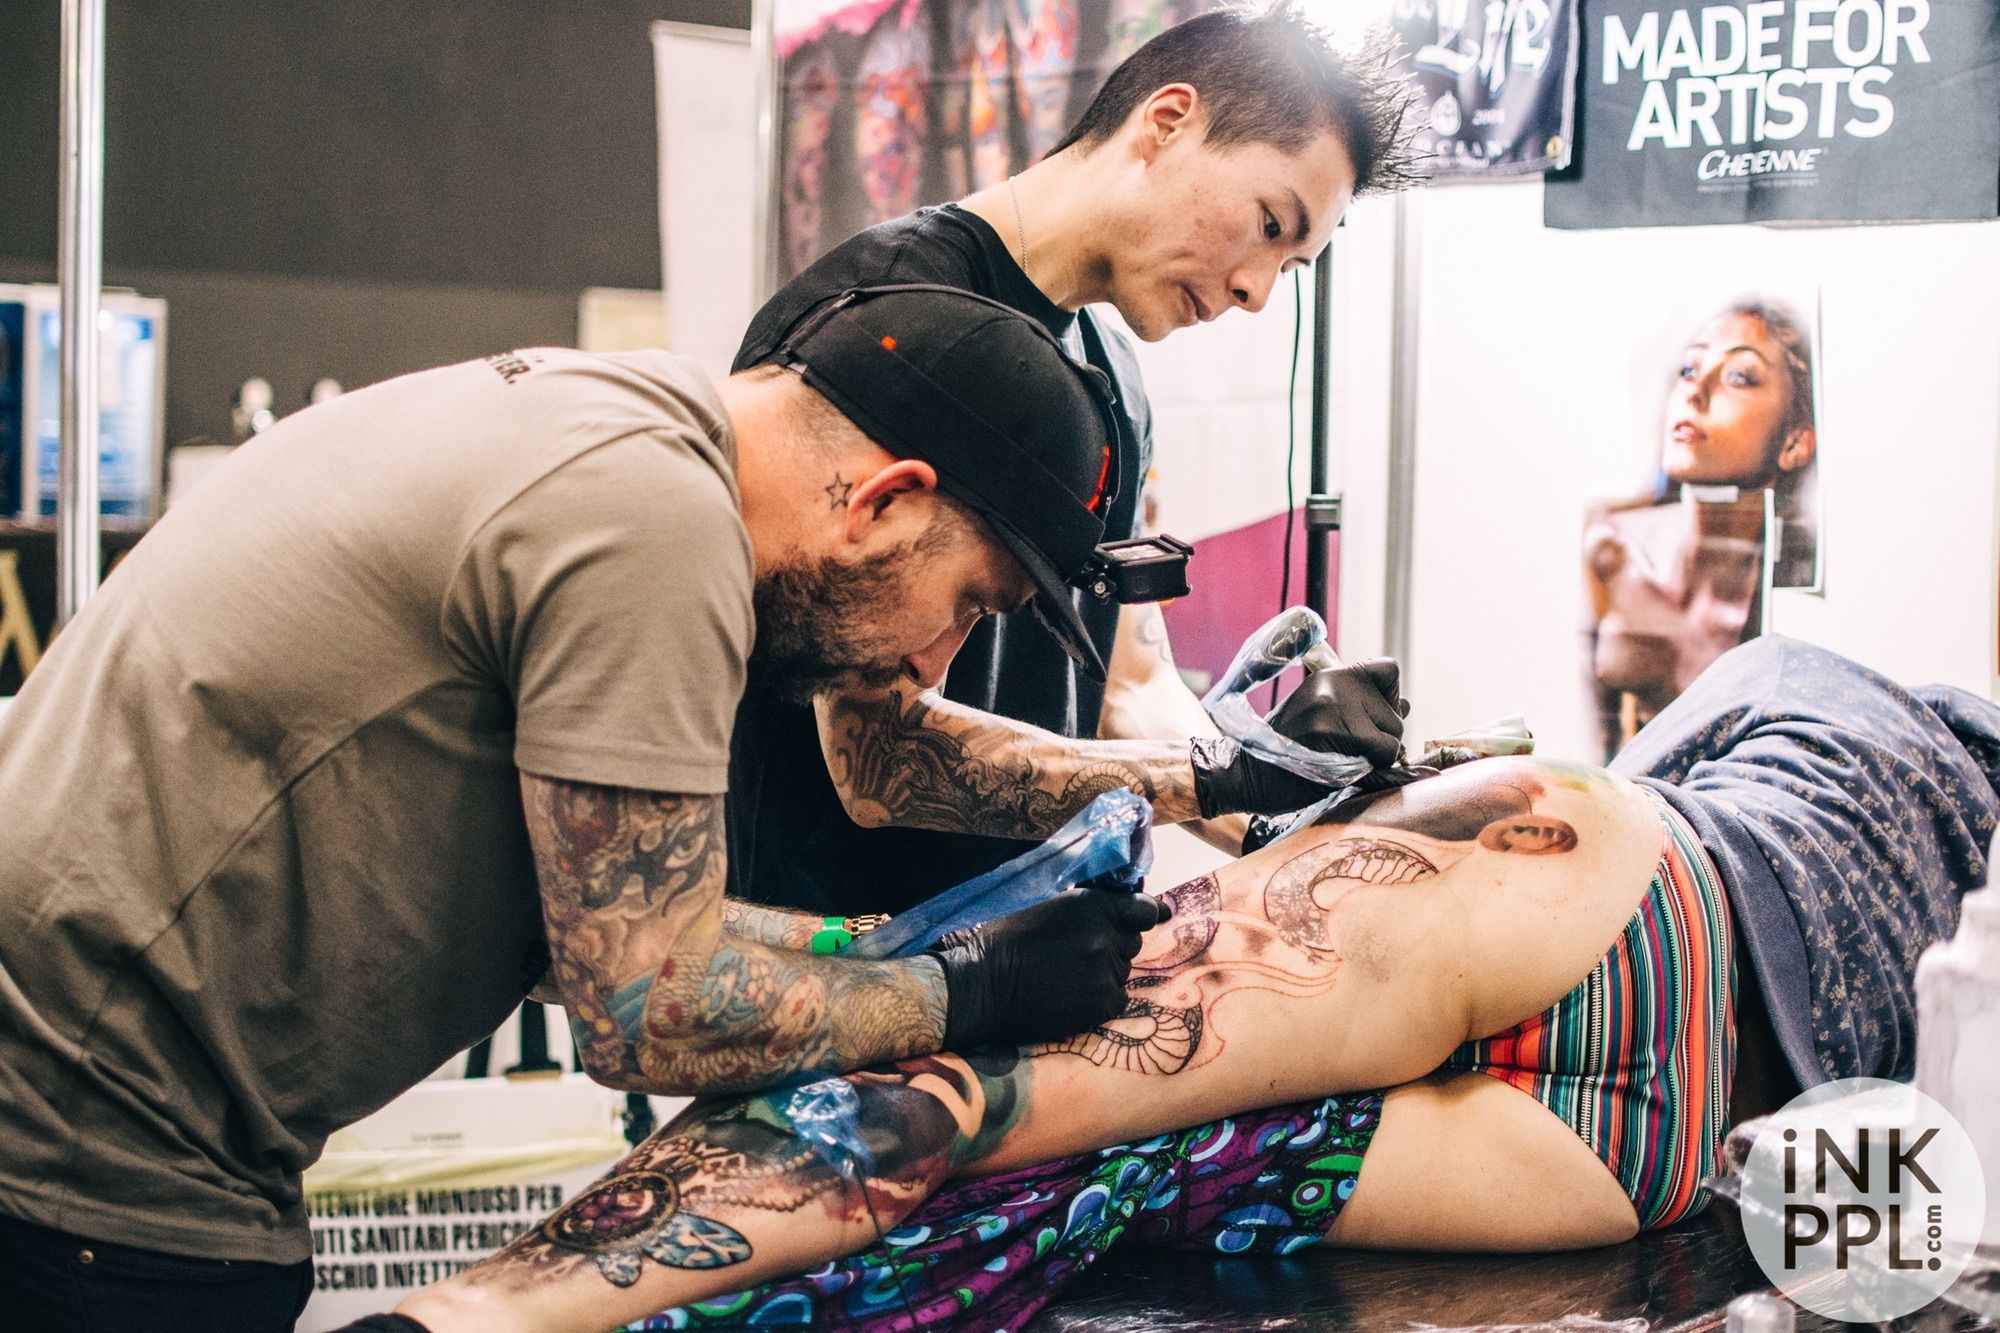 Beauty Is Always Skin Deep at Israel's Tattoo Convention – The Forward